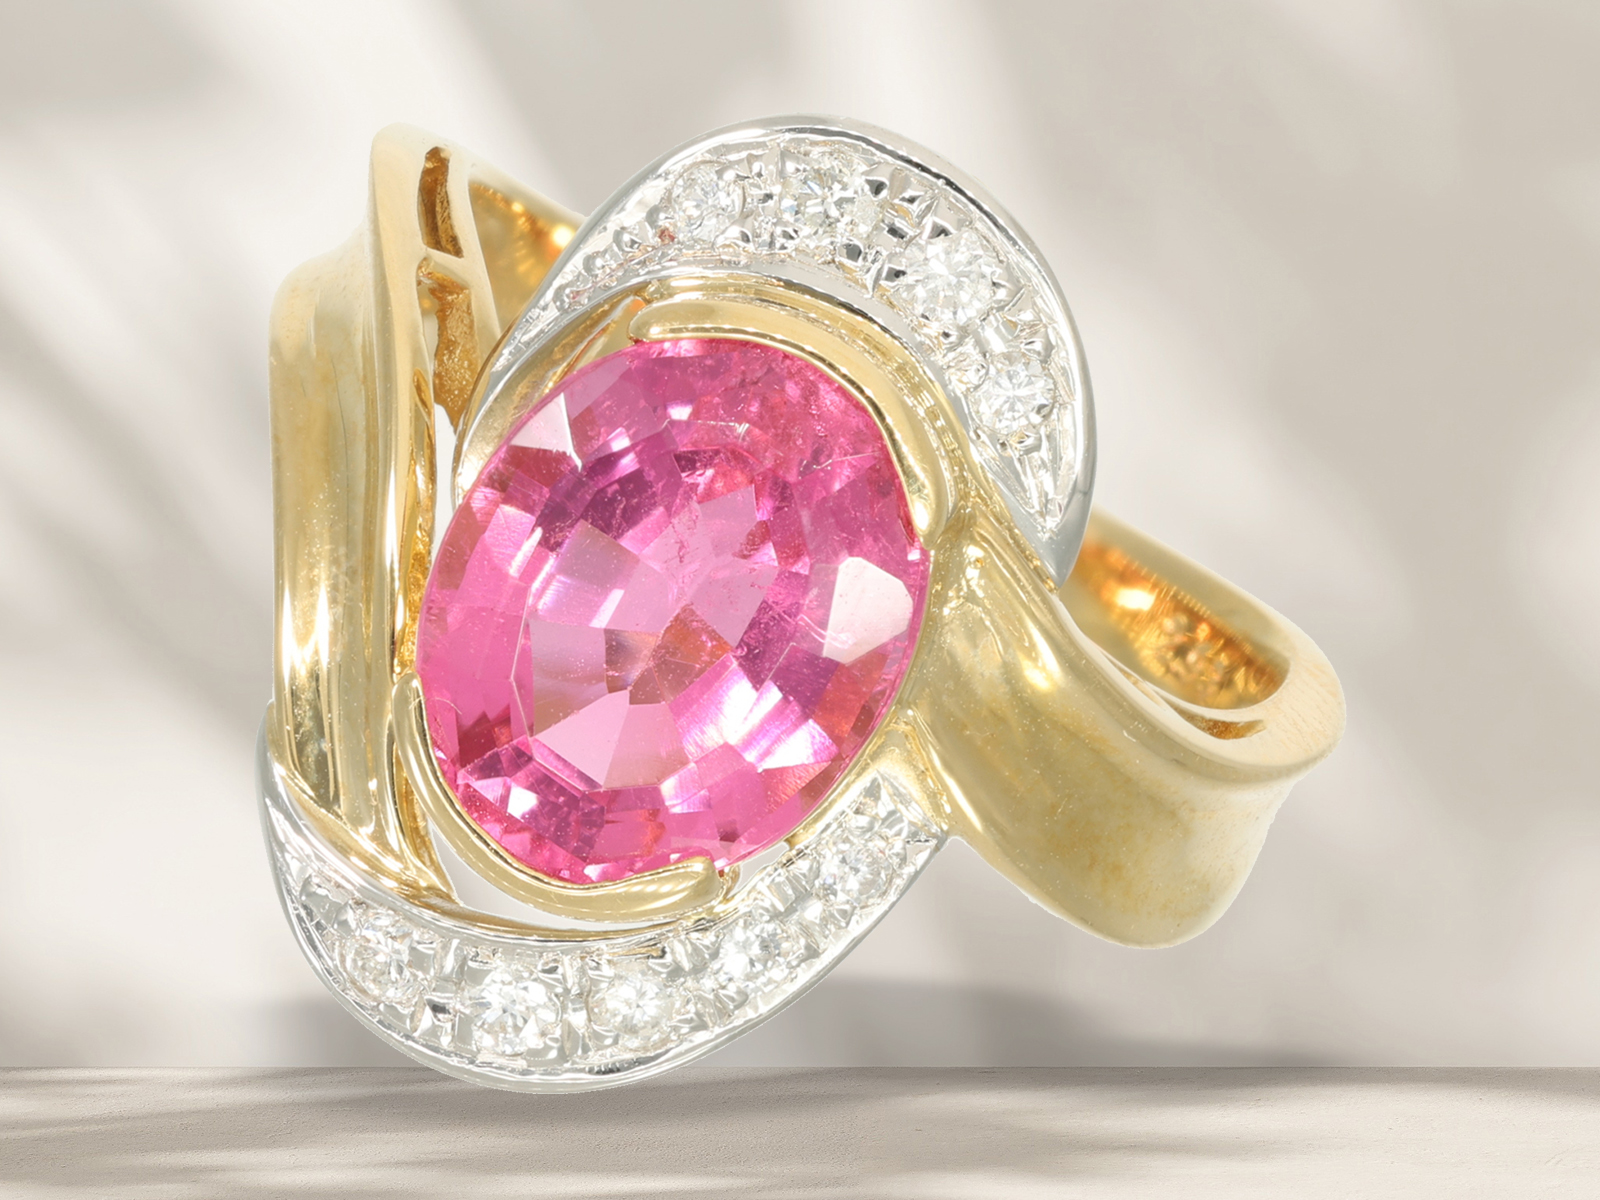 Ring: goldsmith ring with a rare "intense pink" tourmaline and brilliant-cut diamonds